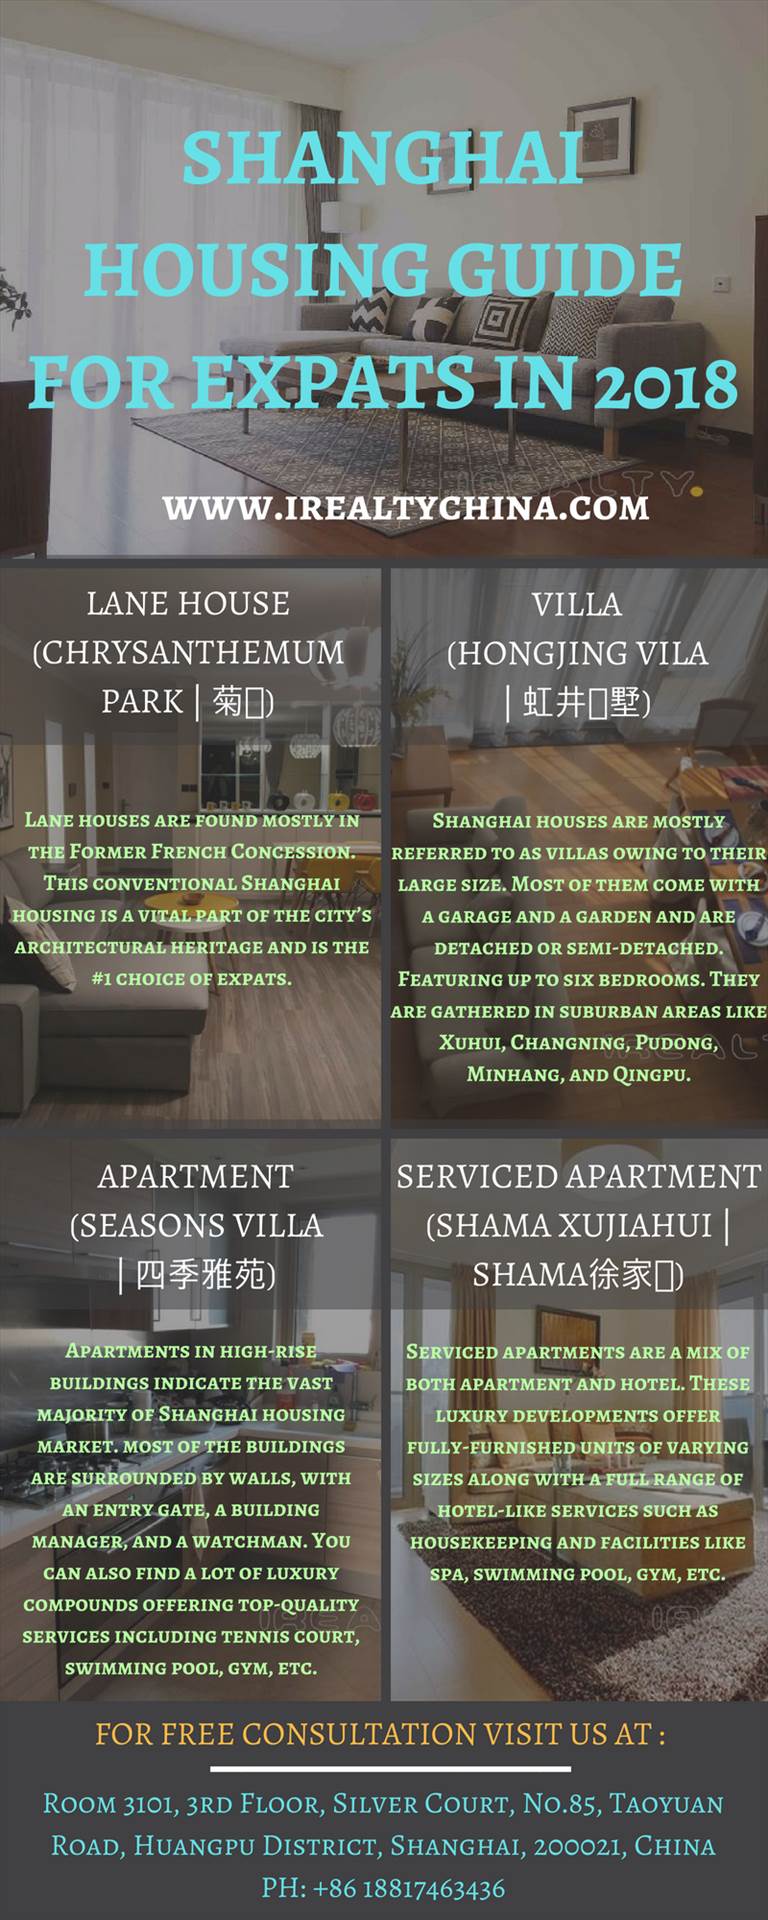 Shanghai Housing Guide for Expats in 2018.jpg  by irealtychina